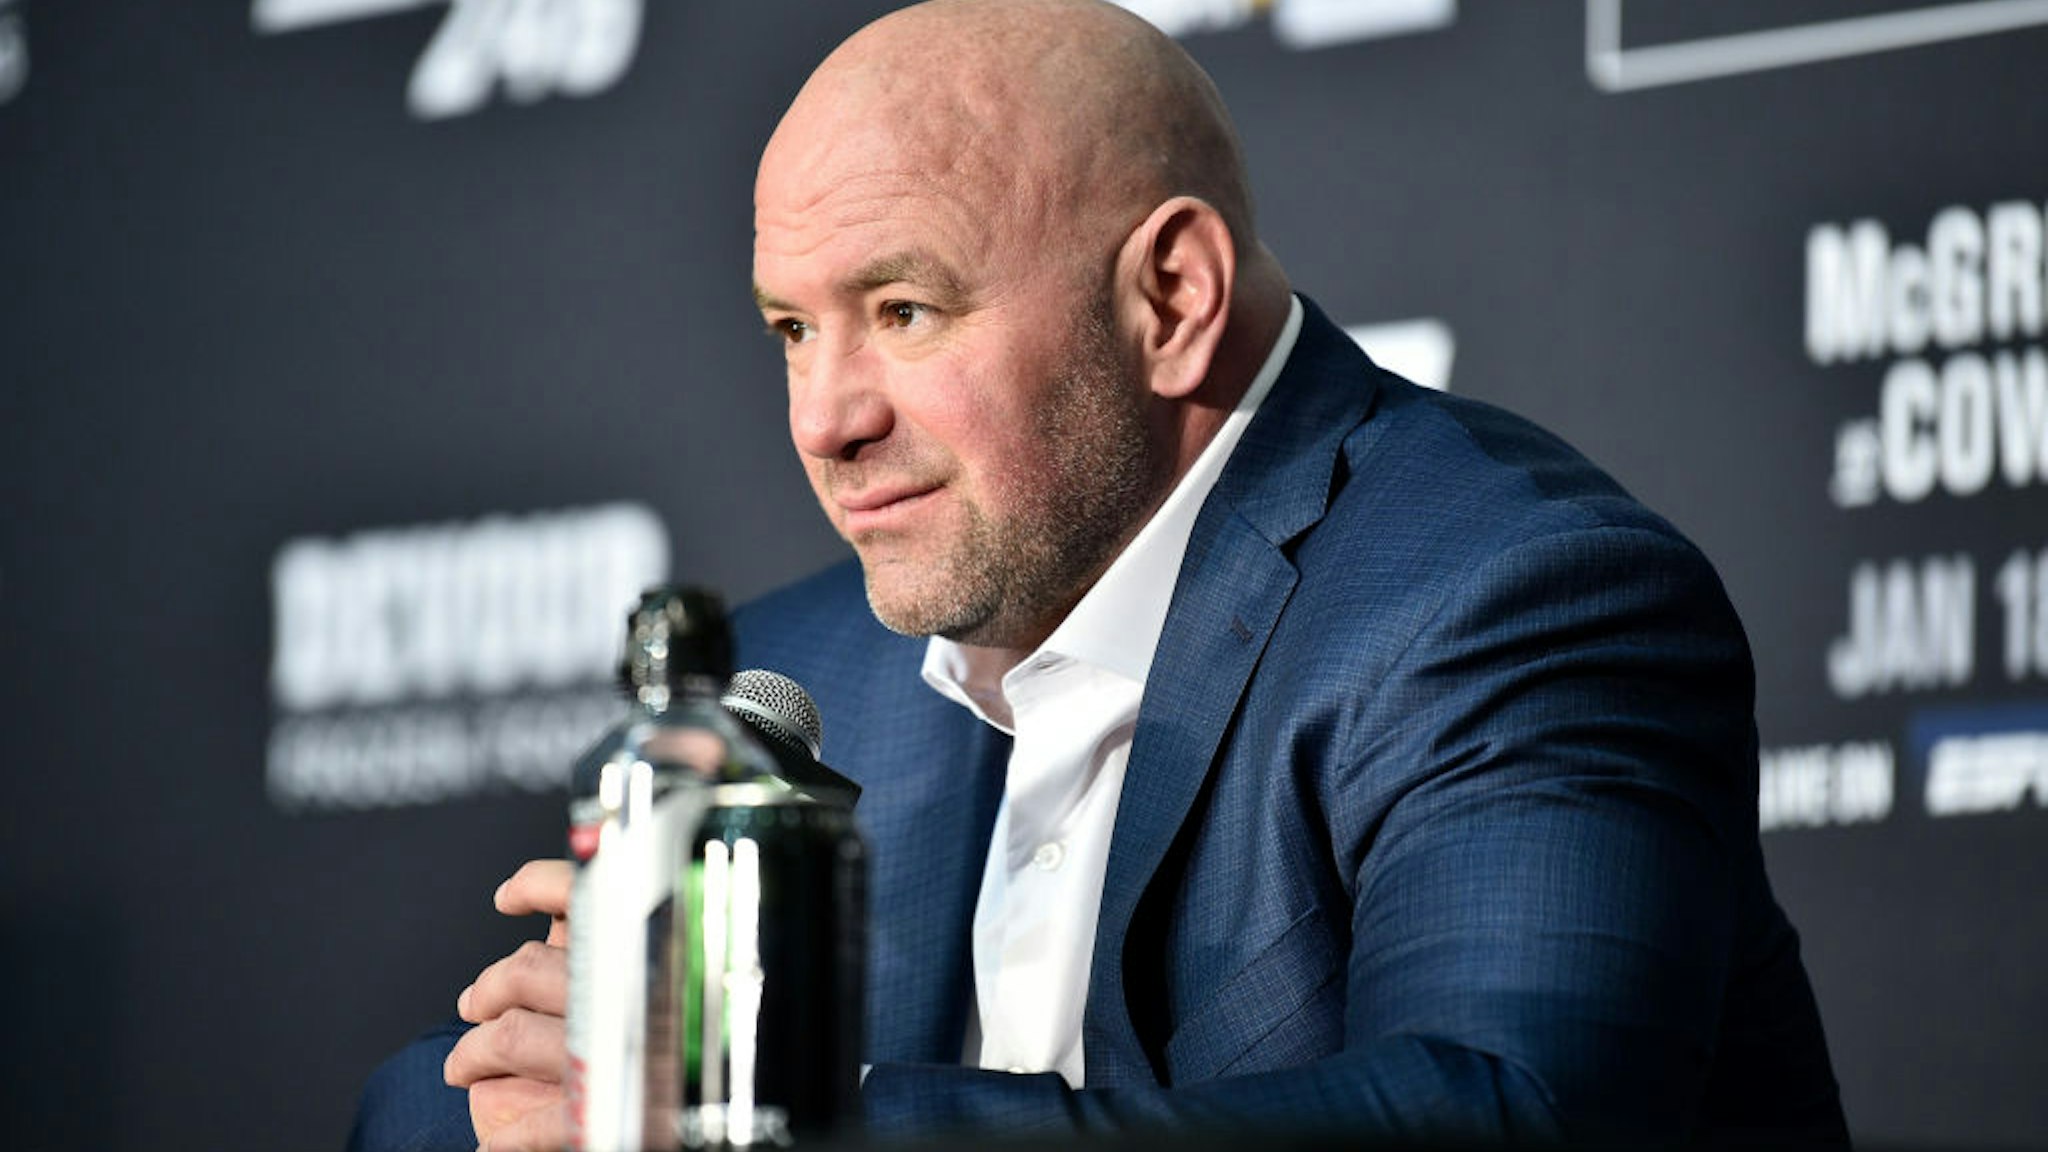 LAS VEGAS, NV - JANUARY 18: UFC President Dana White speaks to the media during the UFC 246 event at T-Mobile Arena on January 18, 2020 in Las Vegas, Nevada. (Photo by Chris Unger/Zuffa LLC via Getty Images)